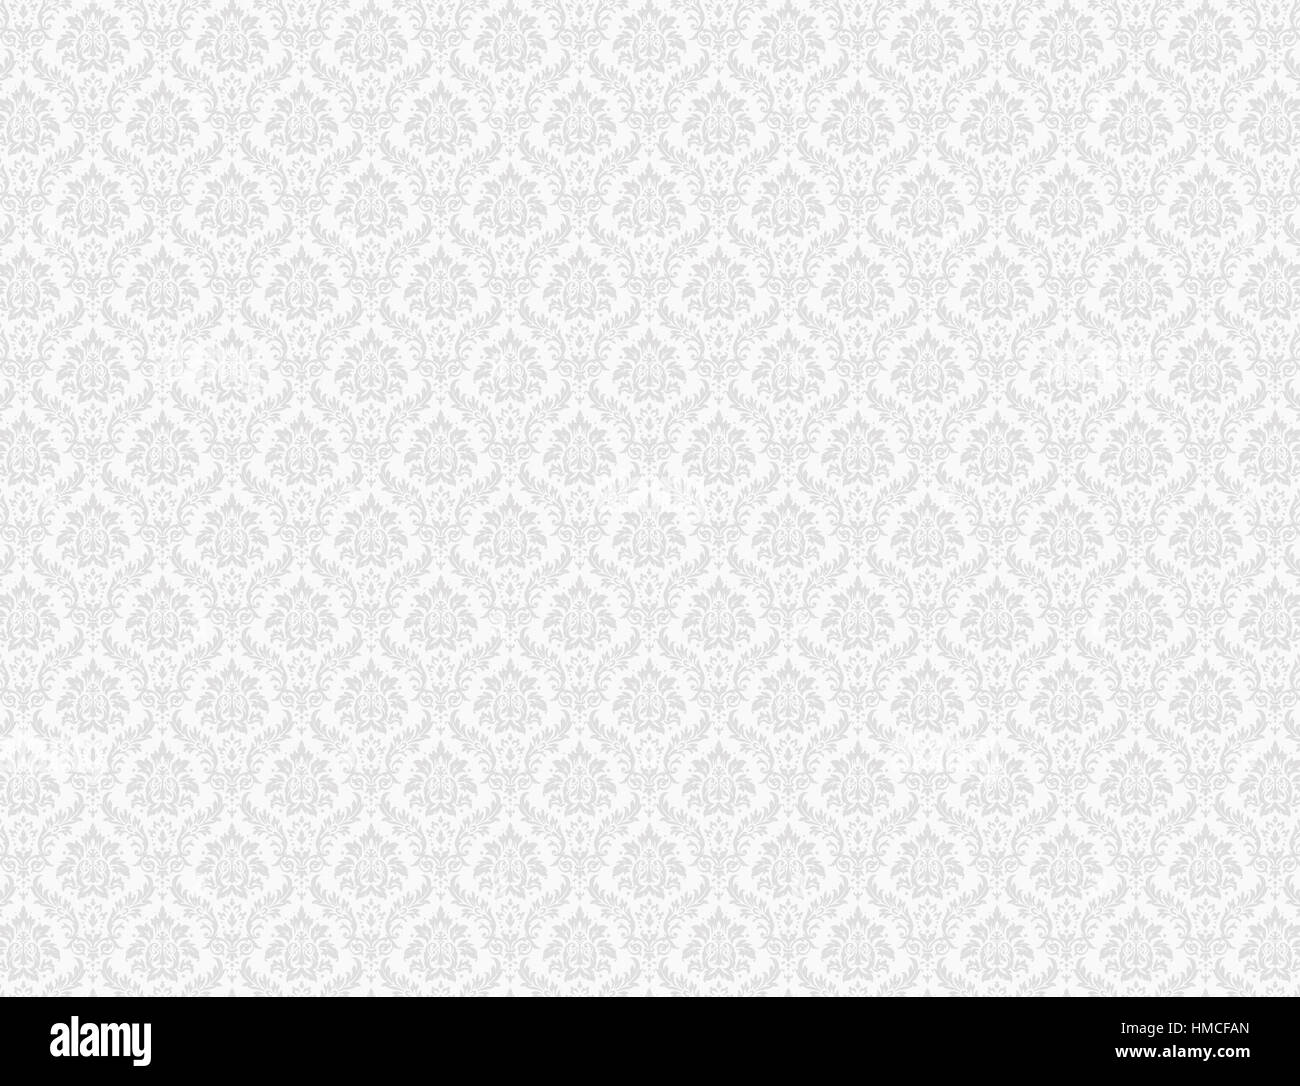 White damask wallpaper with floral patterns Stock Photo